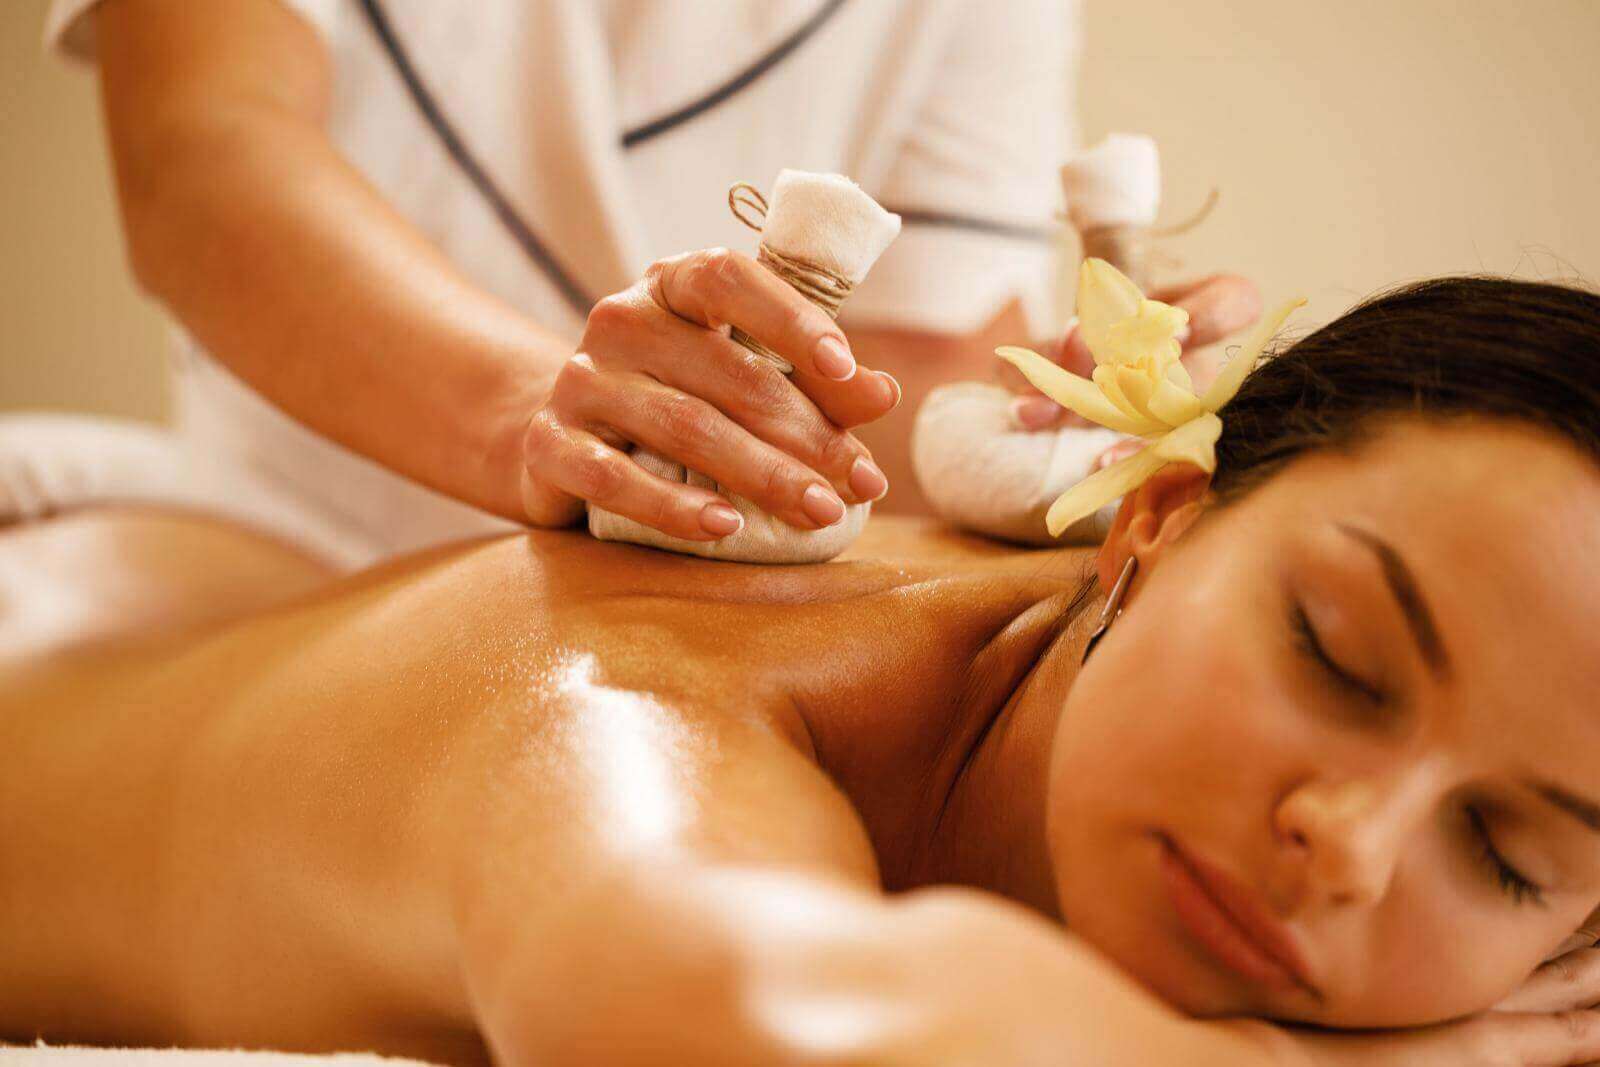 Enhanced mental and physical well-being through Danang Body Massage